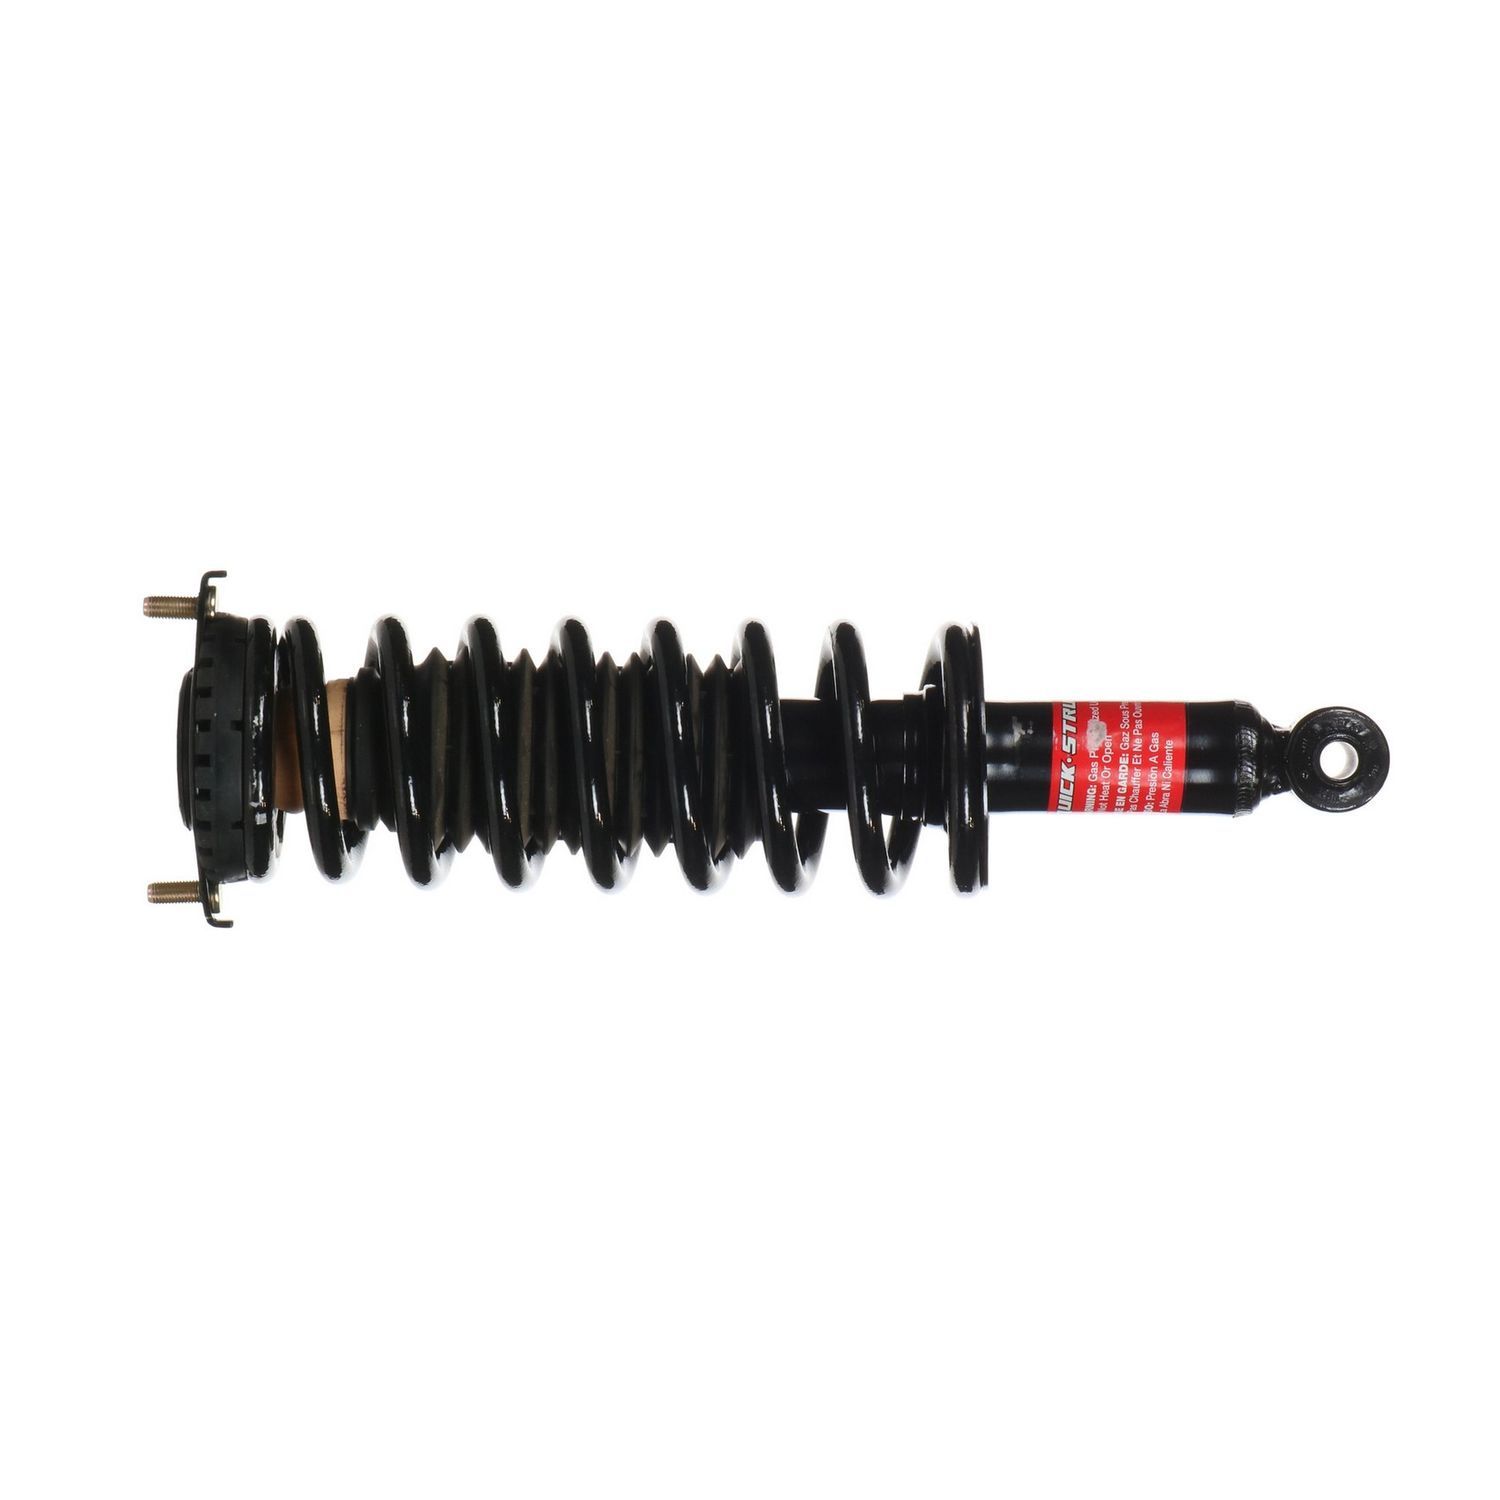 ROADFAR Complete Strut Assemblies,171448 171447 Ready to Install Strut Automotive Replacement Fit for 2000 2001 2002 2003 2004 Legacy